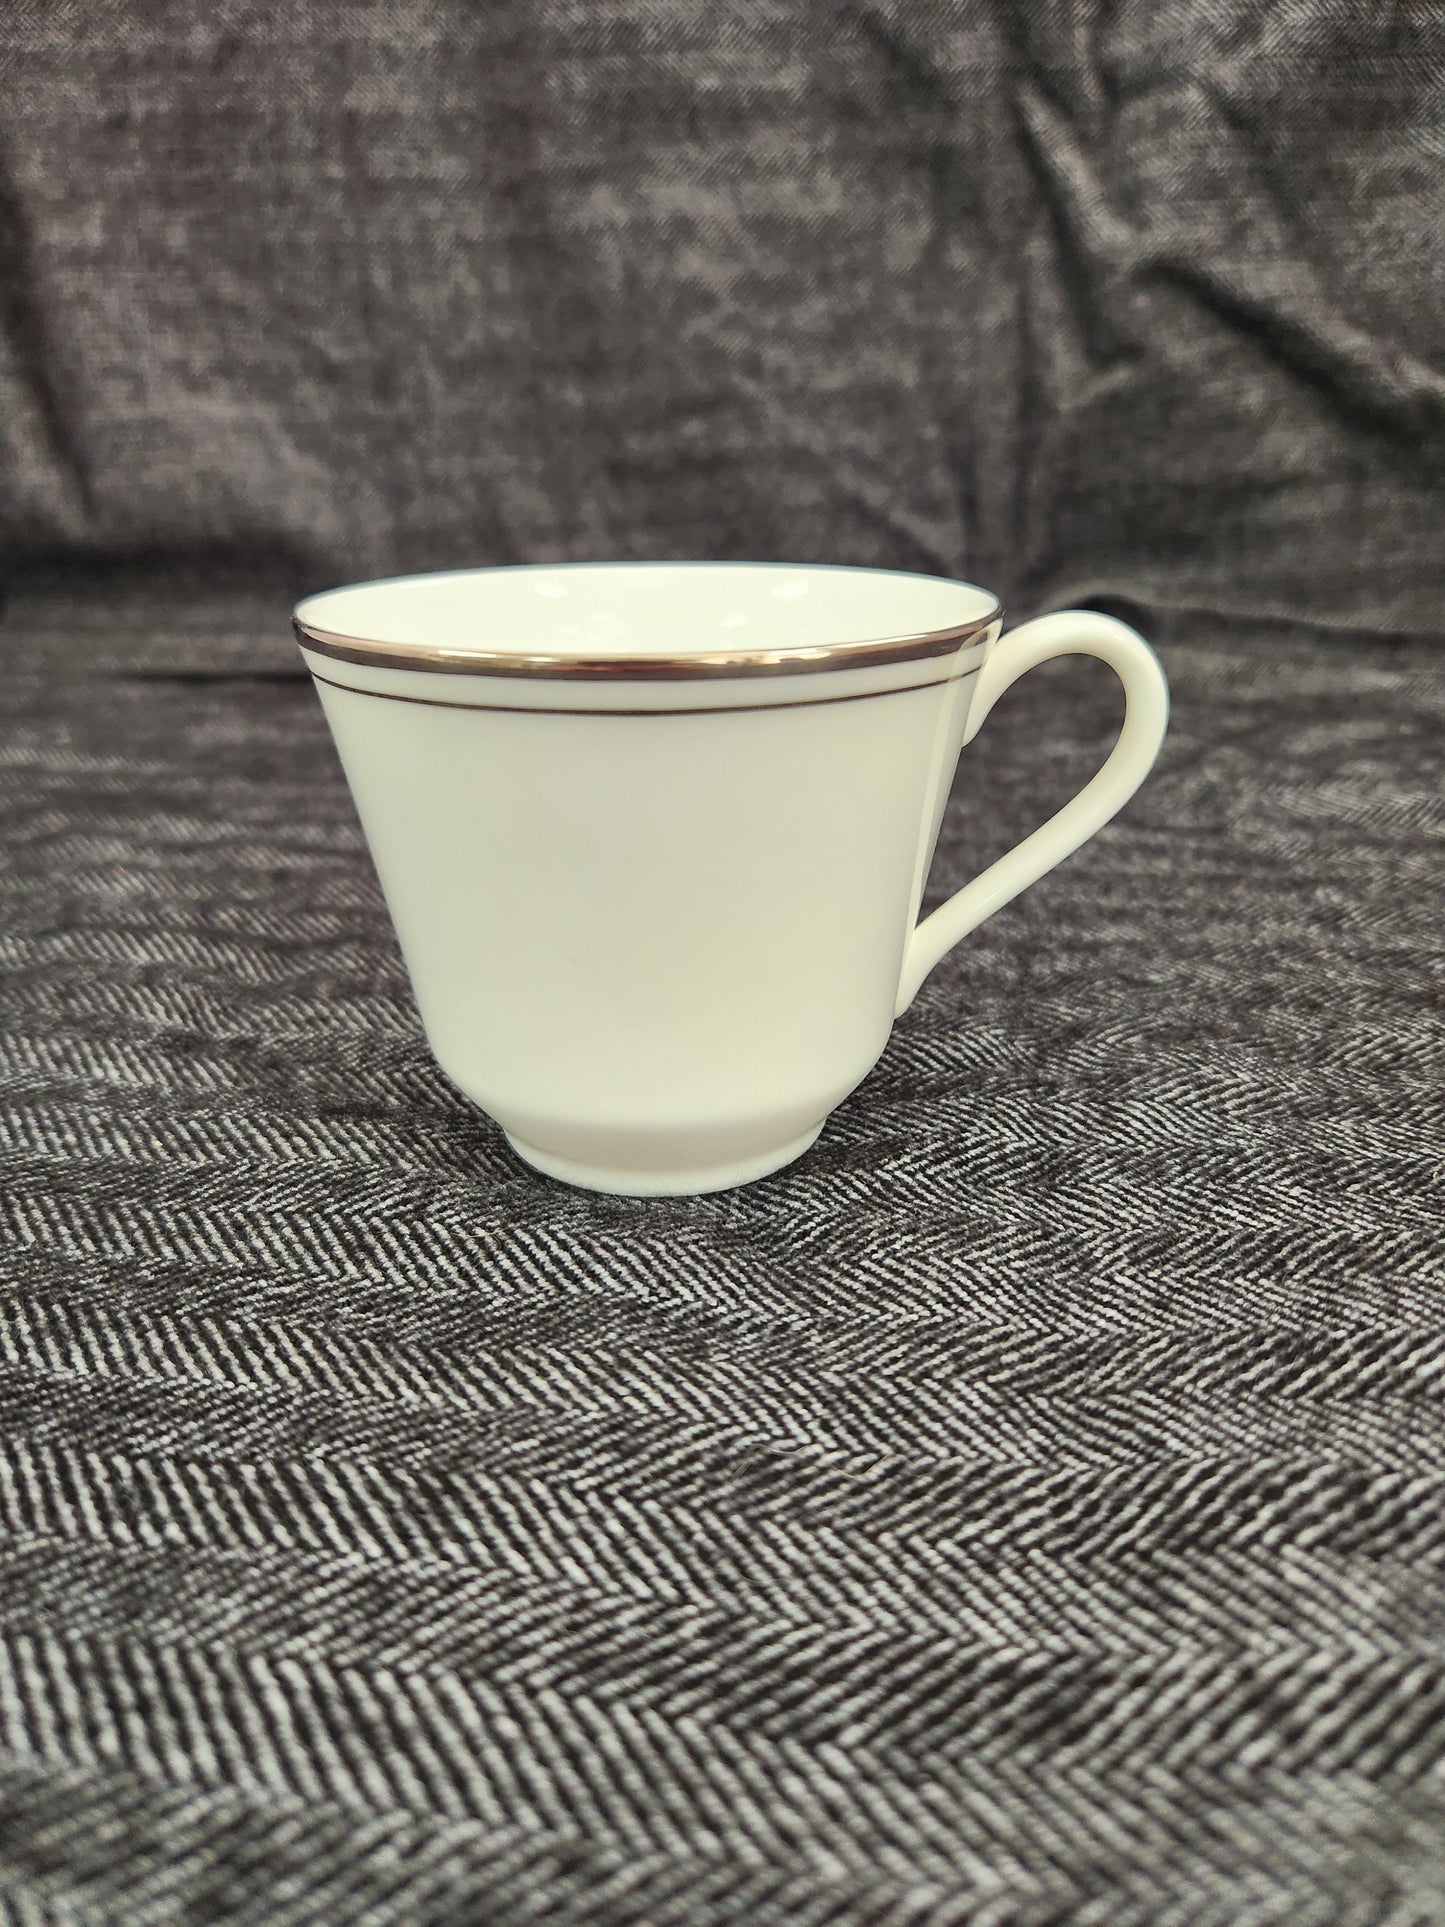 Concord Platinum Flat Cup by Royal Doulton - #H5048